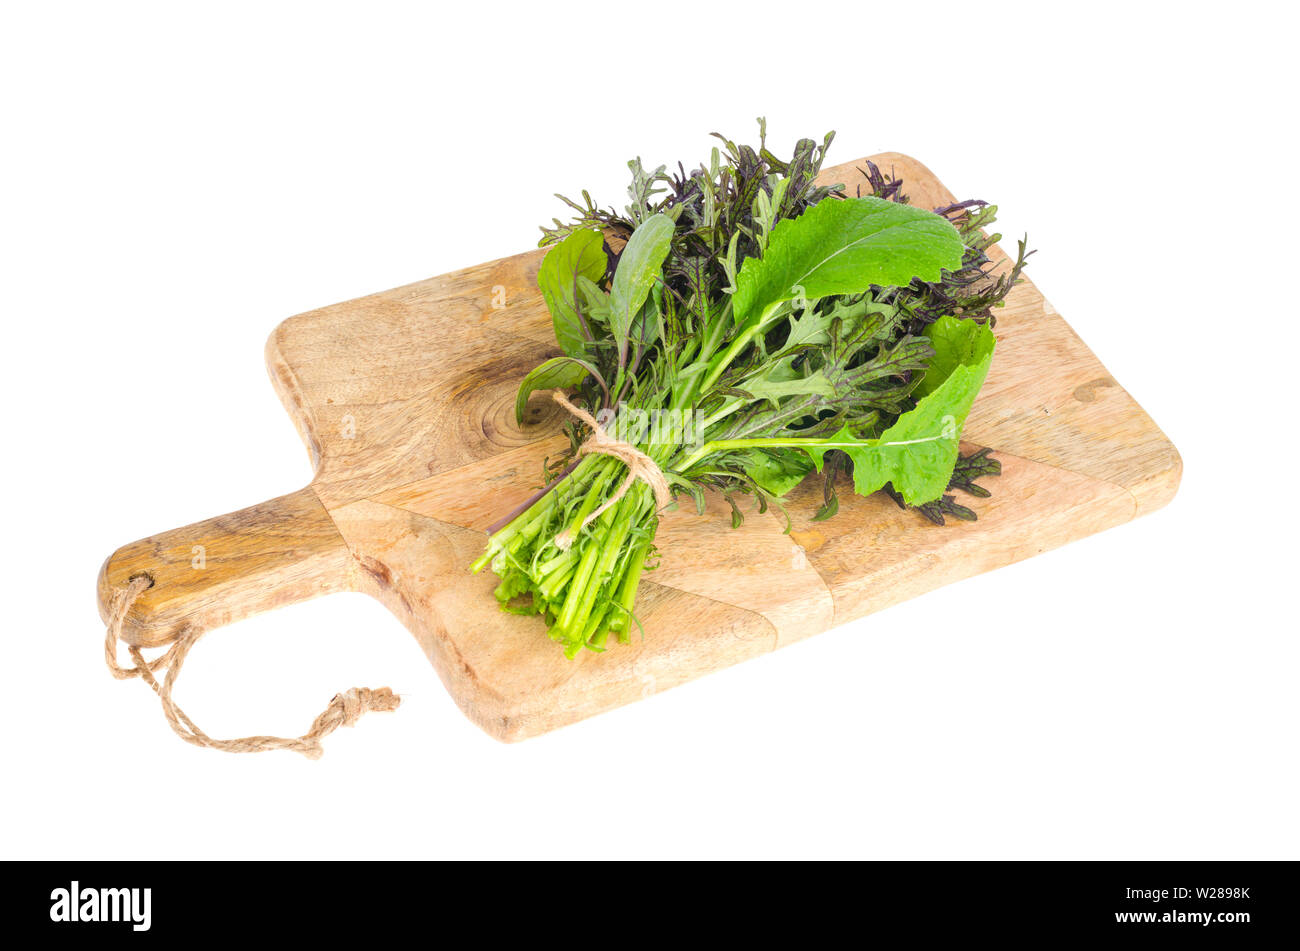 Bunch of fresh green salad leaves. Stock Photo